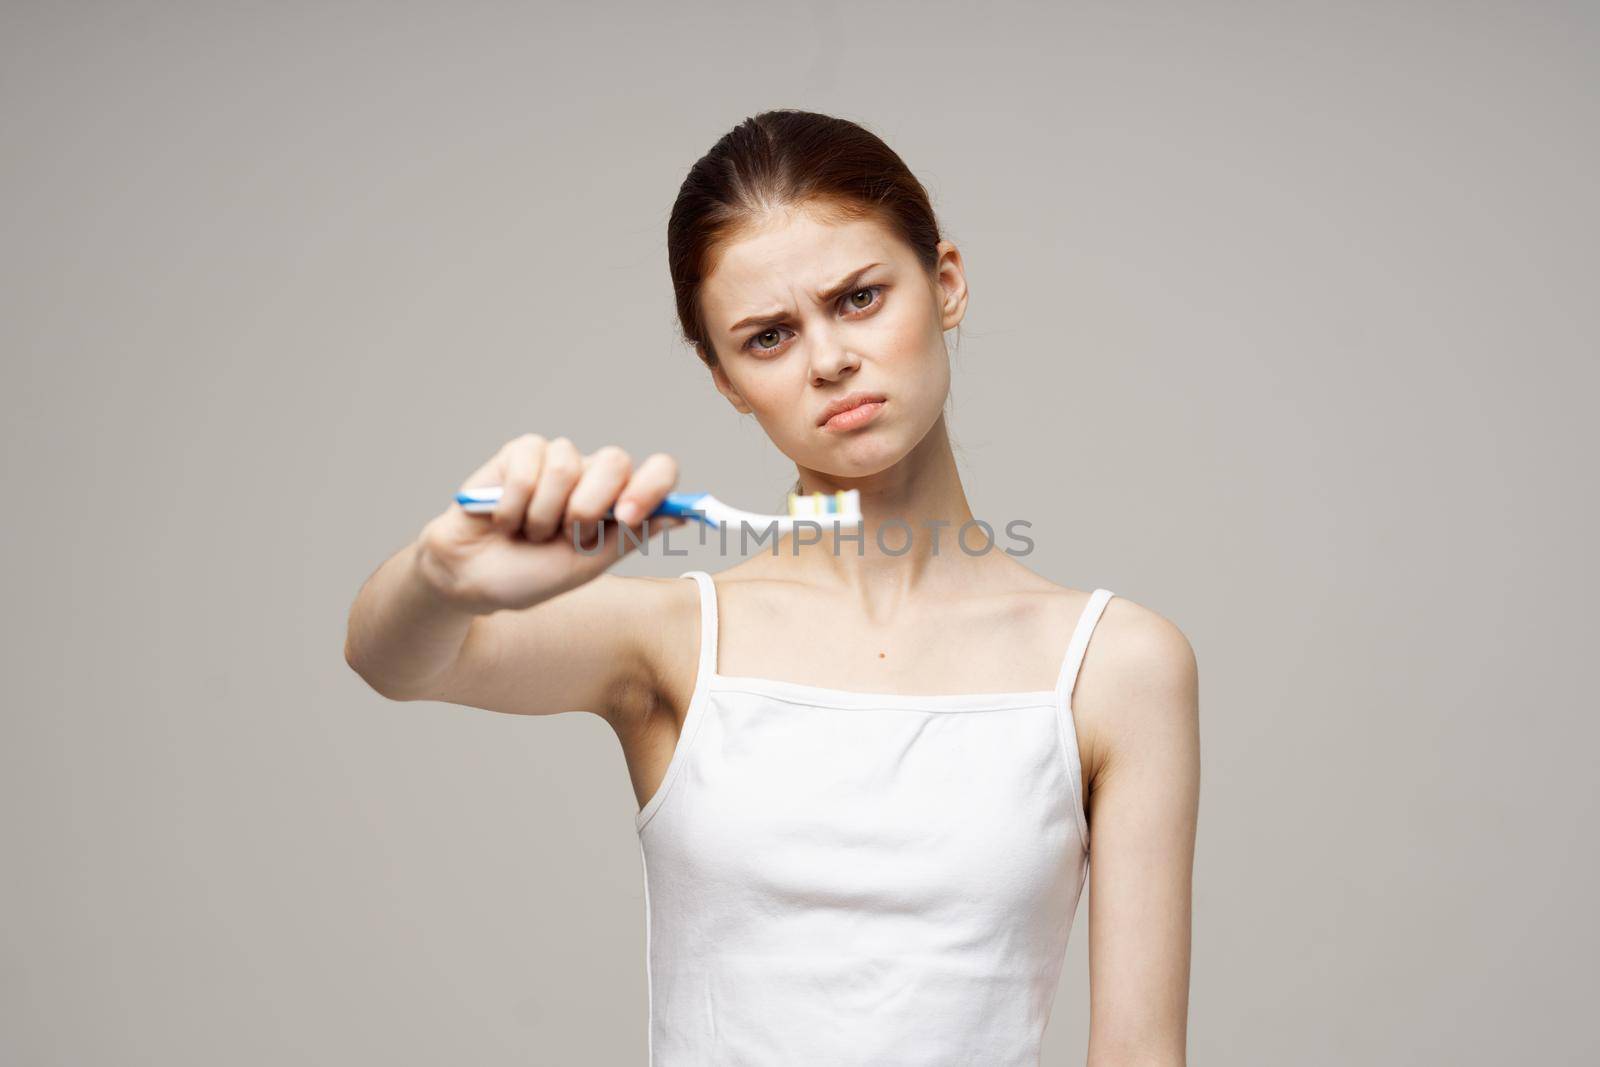 pretty woman toothpaste brushing teeth dental health light background. High quality photo